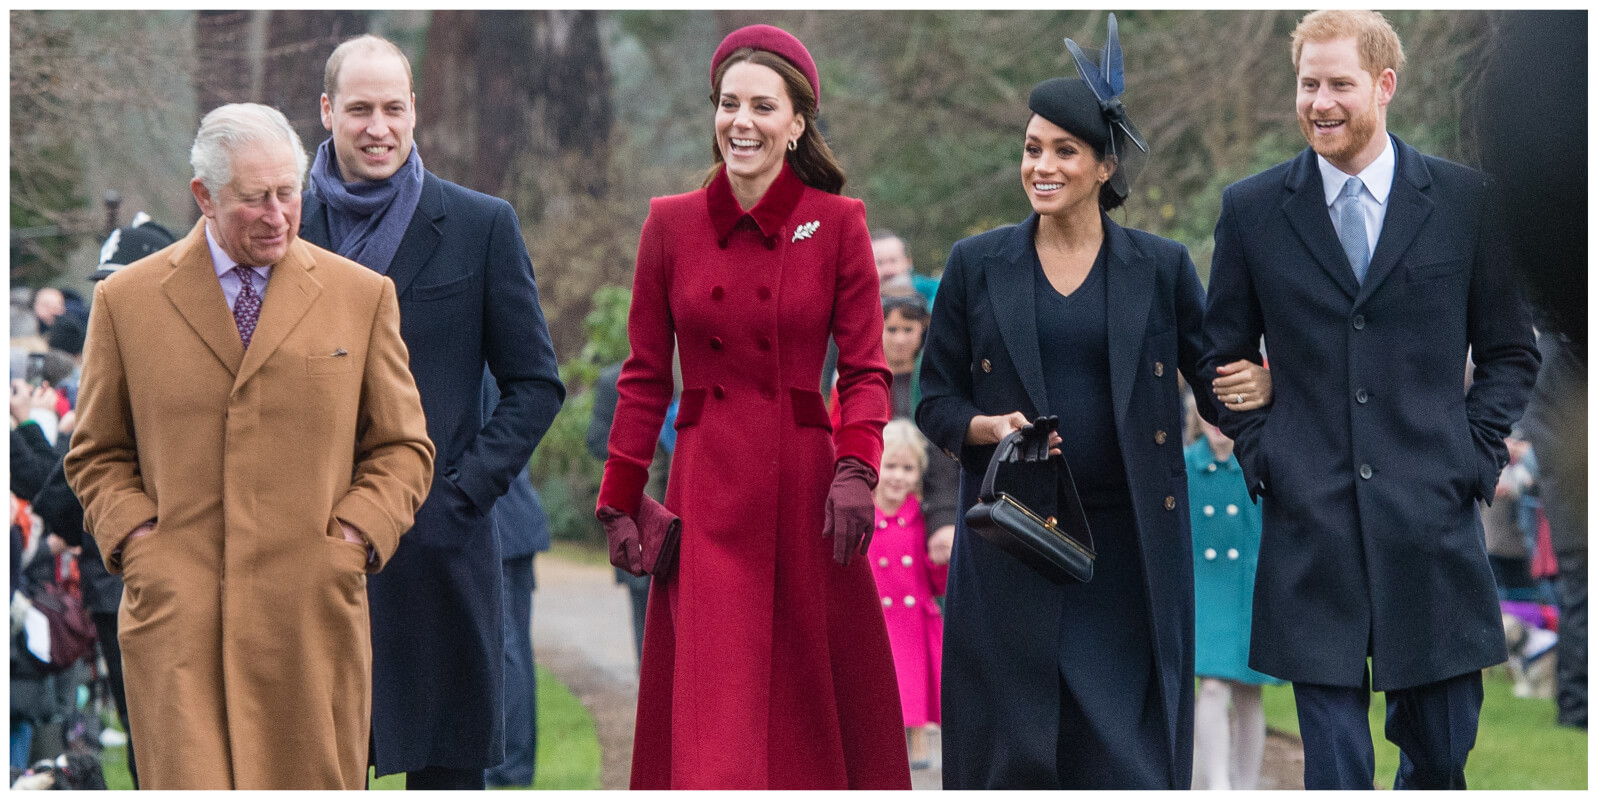 King Charles, Prince William, Kate Middleton, Meghan Markle, and Prince Harry at Christmas Day Church service in 2018.